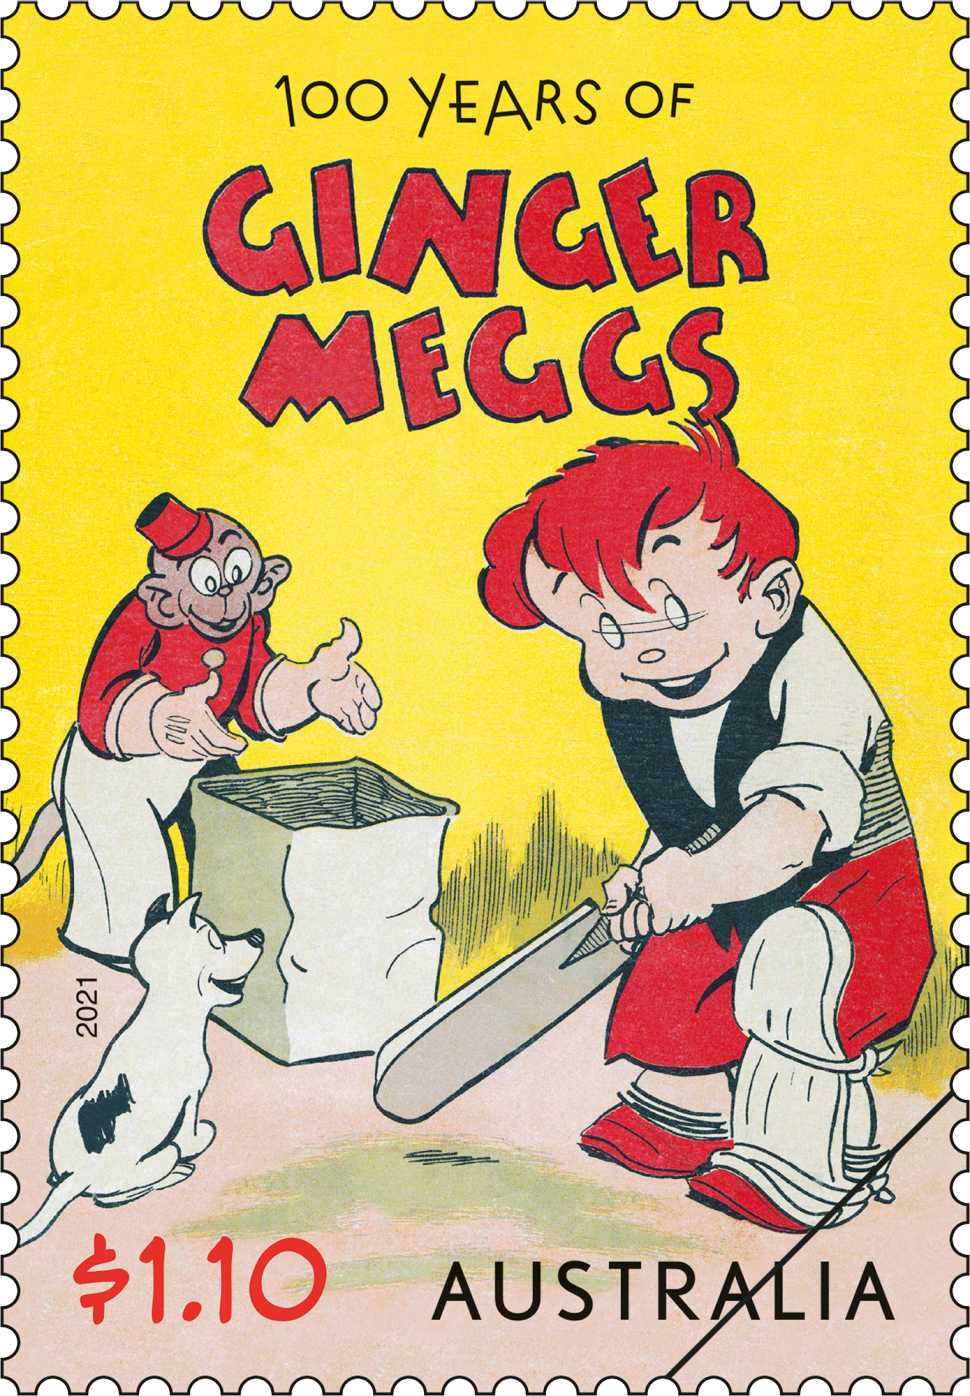 $1.10 Ginger Meggs (playing cricket)